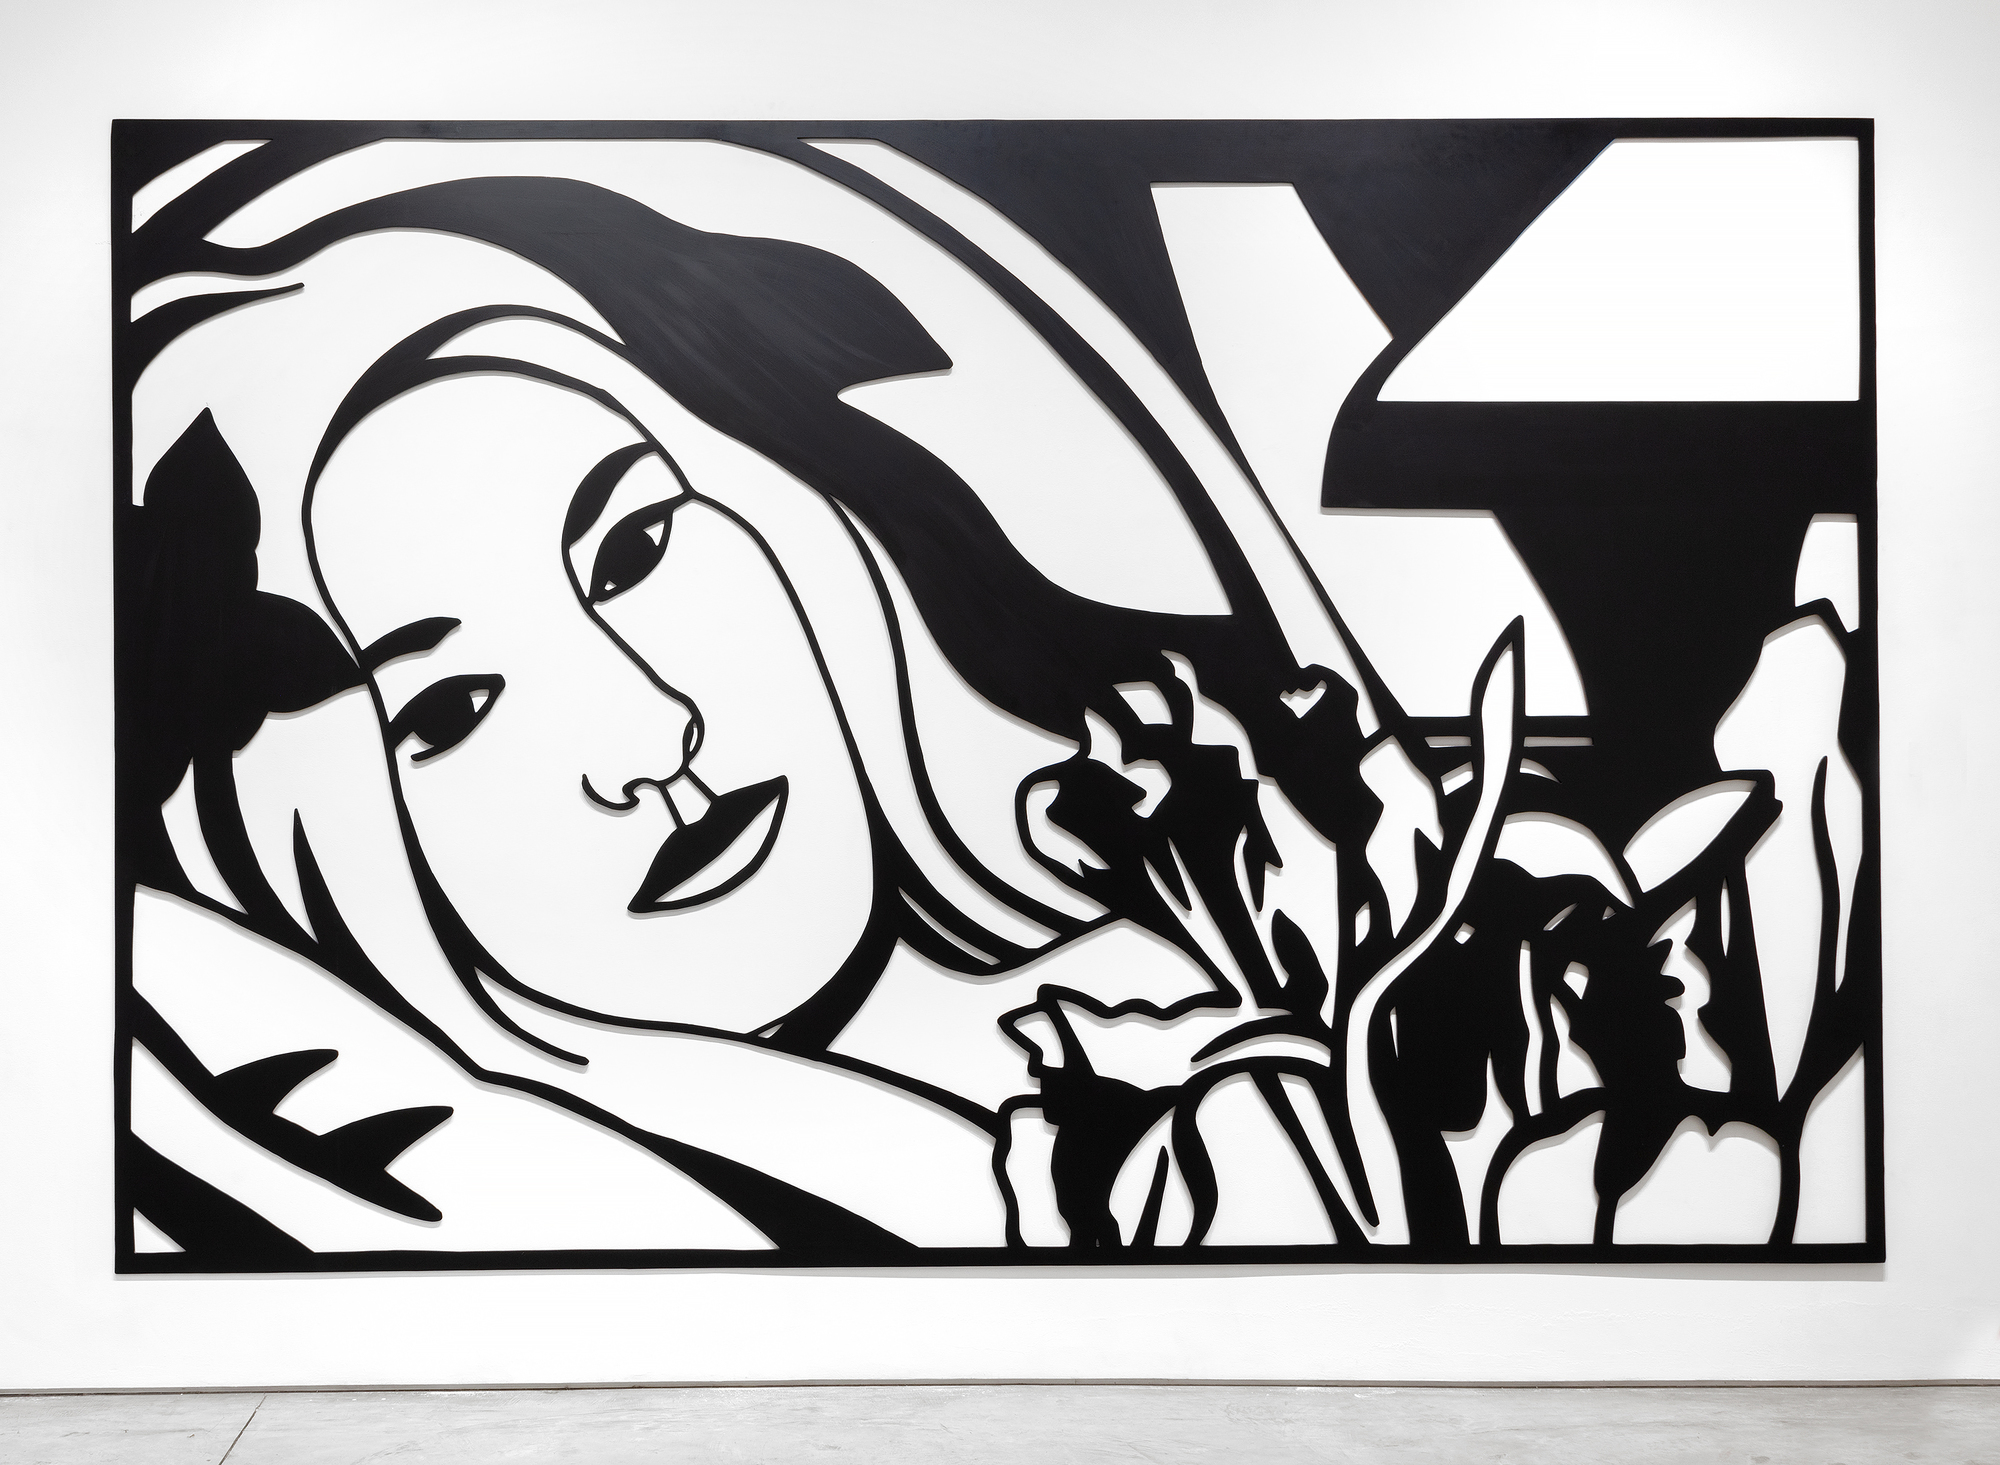 Tom Wesselmann will undoubtedly be remembered for associating his erotic themes with the colors of the American flag. But Wesselmann had considerable gifts as a draftsman, and the line was his principal preoccupation, first as a cartoonist and later as an ardent admirer of Matisse. That he also pioneered a method of turning drawings into laser-cut steel wall reliefs proved a revelation. He began to focus ever more on drawing for the sake of drawing, enchanted that the new medium could be lifted and held: “It really is like being able to pick up a delicate line drawing from the paper.”&lt;br&gt;&lt;br&gt;The Steel Drawings caused both excitement and confusion in the art world. After acquiring one of the ground-breaking works in 1985, the Whitney Museum of American Art wrote Wesselmann wondering if it should be cataloged as a drawing or a sculpture. The work had caused such a stir that when Eric Fischl visited Wesselmann at his studio and saw steel-cut works for the first time, he remembered feeling jealous. He wanted to try it but dared not. It was clear: ‘Tom owned the technique completely.’&lt;br&gt;&lt;br&gt;Wesselmann owed much of that technique to his year-long collaboration with metalwork fabricator Alfred Lippincott. Together, in 1984 they honed a method for cutting the steel with a laser that provided the precision he needed to show the spontaneity of his sketches. Wesselmann called it ‘the best year of my life’, elated at the results that he never fully achieved with aluminum that required each shape be hand-cut.  “I anticipated how exciting it would be for me to get a drawing back in steel. I could hold it in my hands. I could pick it up by the lines…it was so exciting…a kind of near ecstasy, anyway, but there’s really been something about the new work that grabbed me.”&lt;br&gt;&lt;br&gt;Bedroom Brunette with Irises is a Steel Drawing masterwork that despite its uber-generous scale, utilizes tight cropping to provide an unimposing intimacy while maintaining a free and spontaneous quality. The figure’s outstretched arms and limbs and body intertwine with the petals and the interior elements providing a flowing investigative foray of black lines and white ‘drop out’ shapes provided by the wall. It recalls Matisse and any number of his reclining odalisque paintings. Wesselmann often tested monochromatic values to discover the extent to which color would transform his hybrid objects into newly developed Steel Drawing works and, in this case, continued with a color steel-cut version of the composition Bedroom Blonde with Irises (1987) and later still, in 1993 with a large-scale drawing in charcoal and pastel on paper.